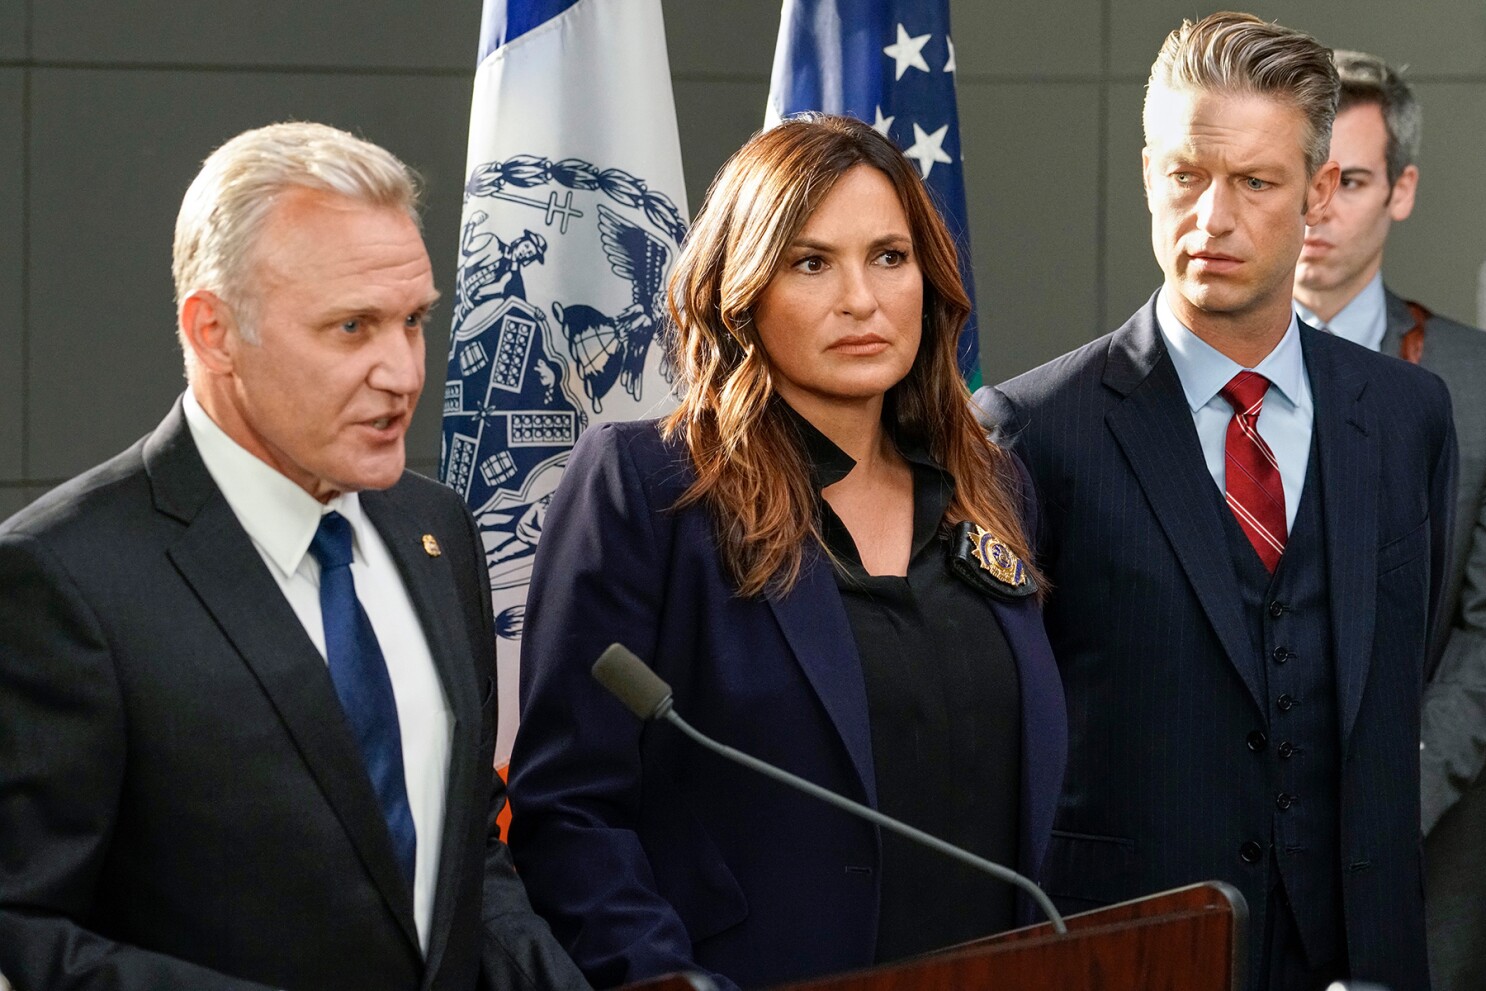 law and order svu season 6 episode 66